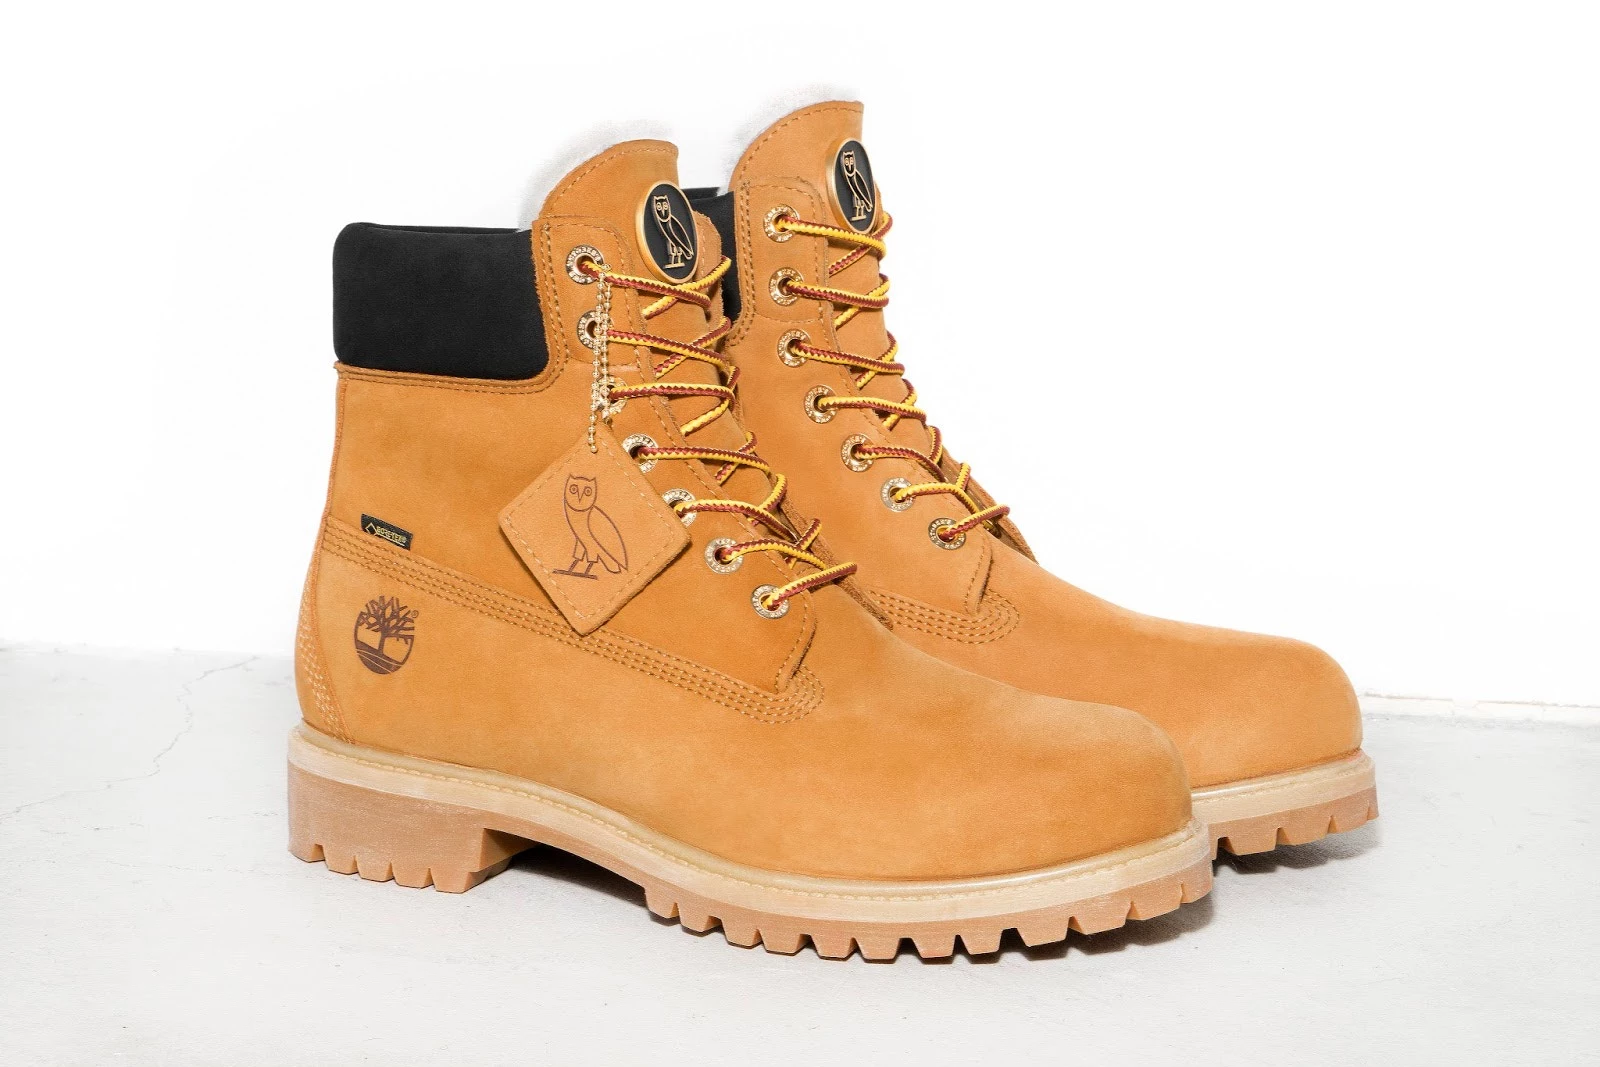 Off White x Timberland Boots